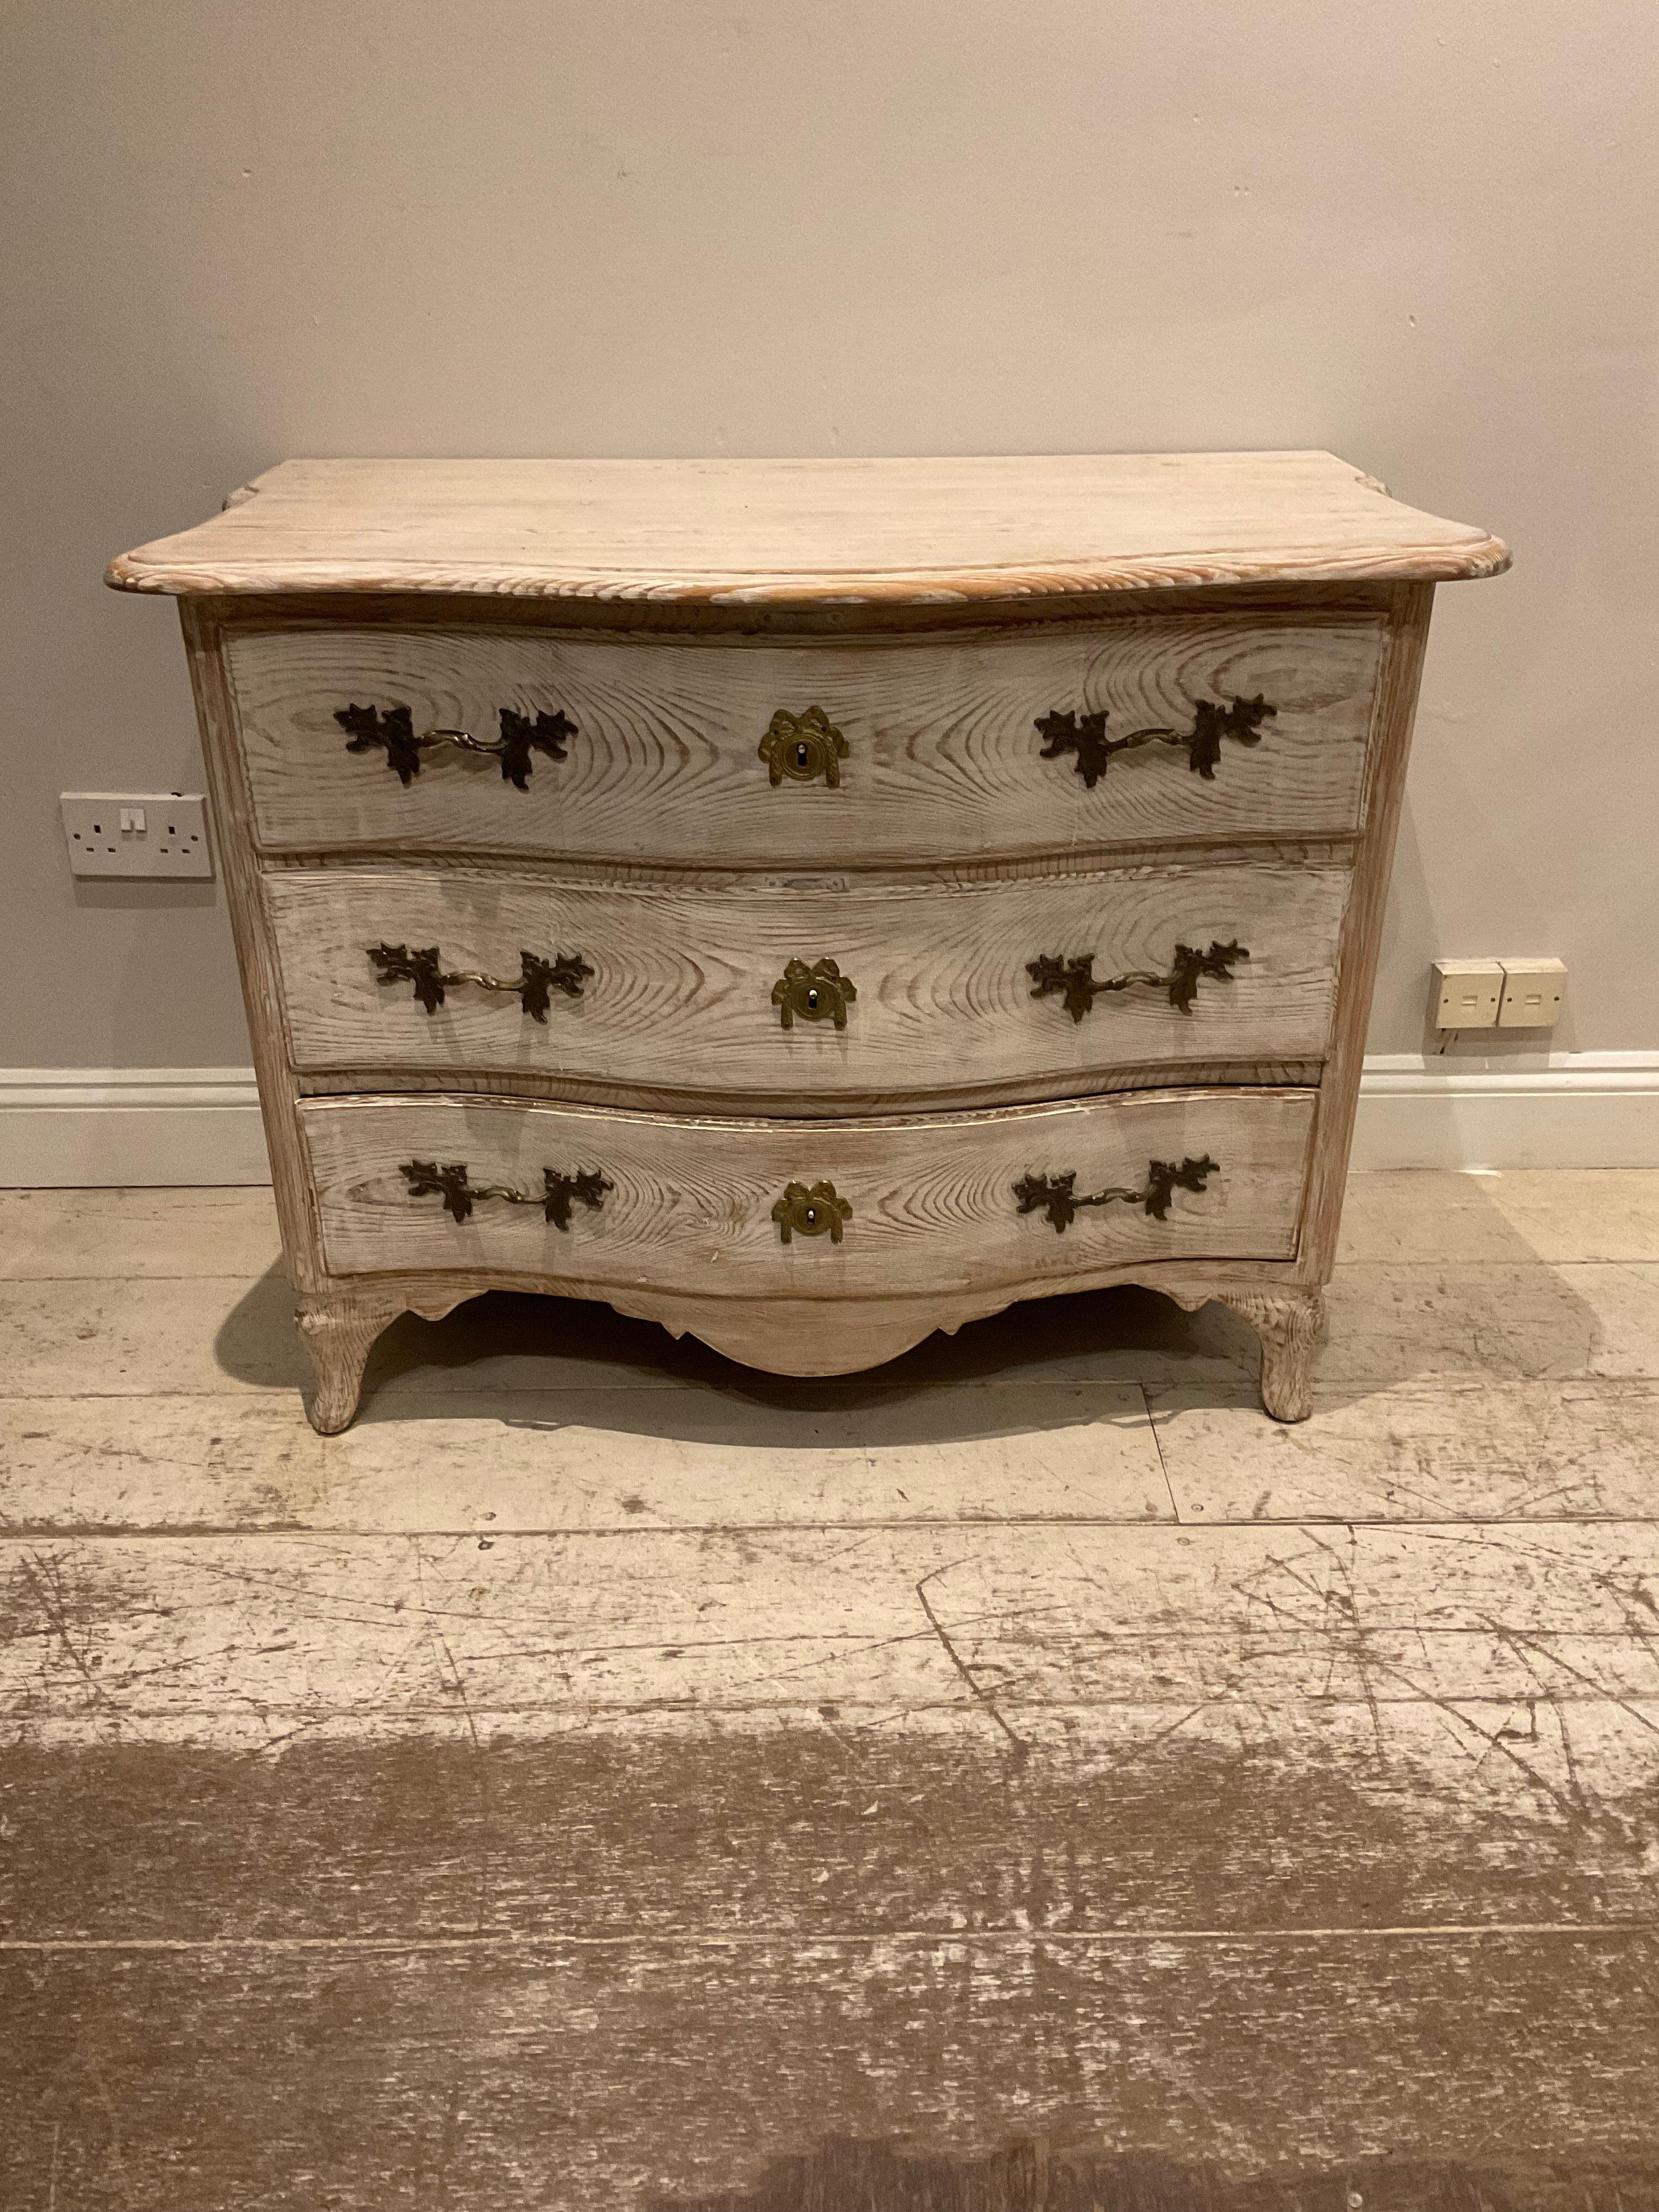  Late C18th Swedish oak commode/chest of drawers. 
The wood has been lightened to  show off its beautiful and highly decorative grain. 

The commode has a serpentine shaped front with three useful good size drawers with original handles and